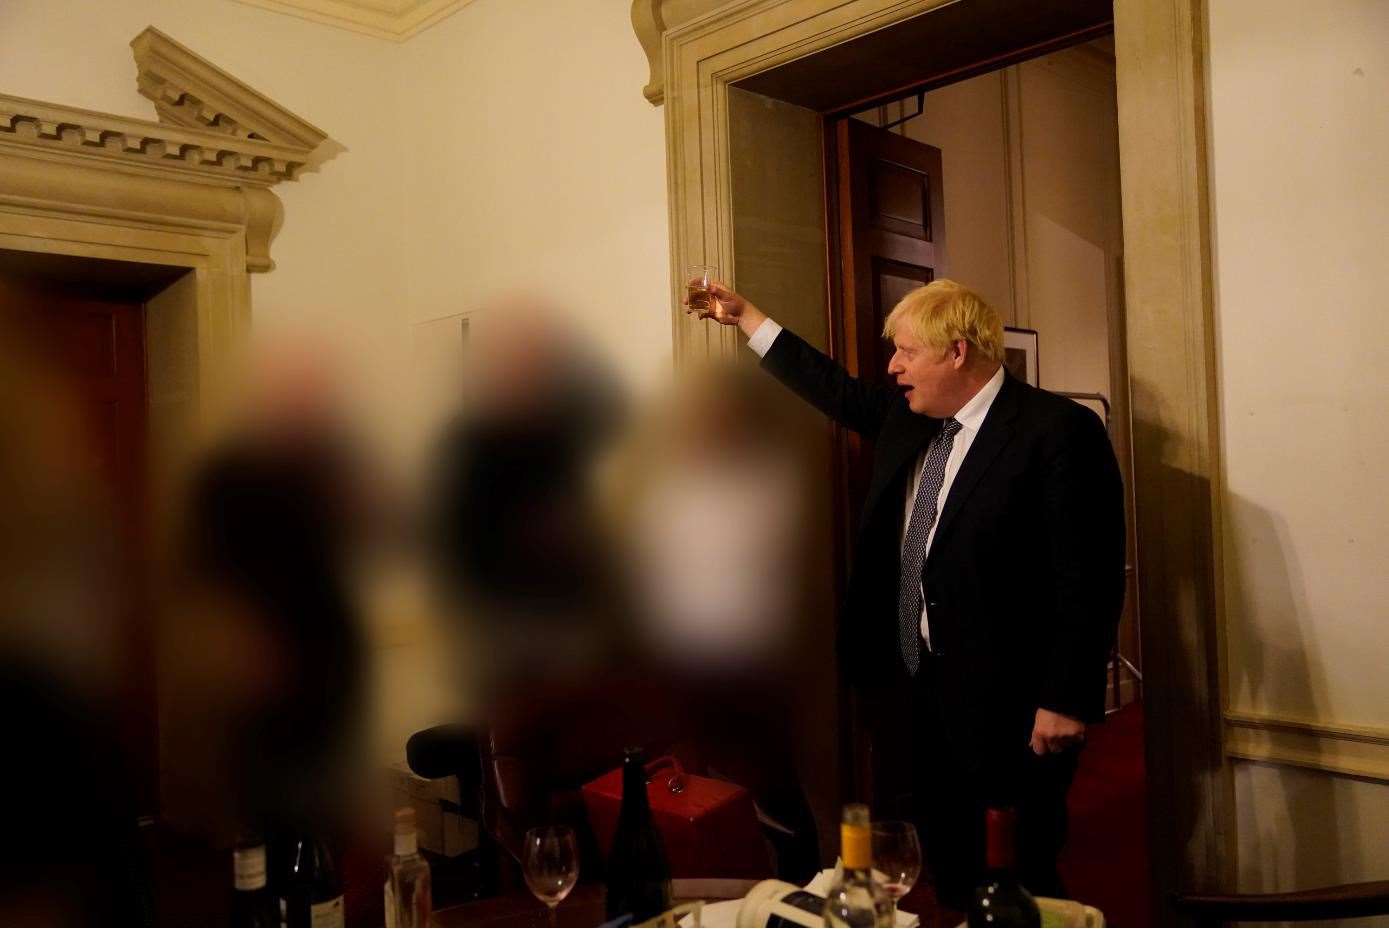 Boris Johnson at a gathering in 10 Downing Street for the departure of a special adviser in November 2020 (Sue Gray Report/Cabinet Office/PA)